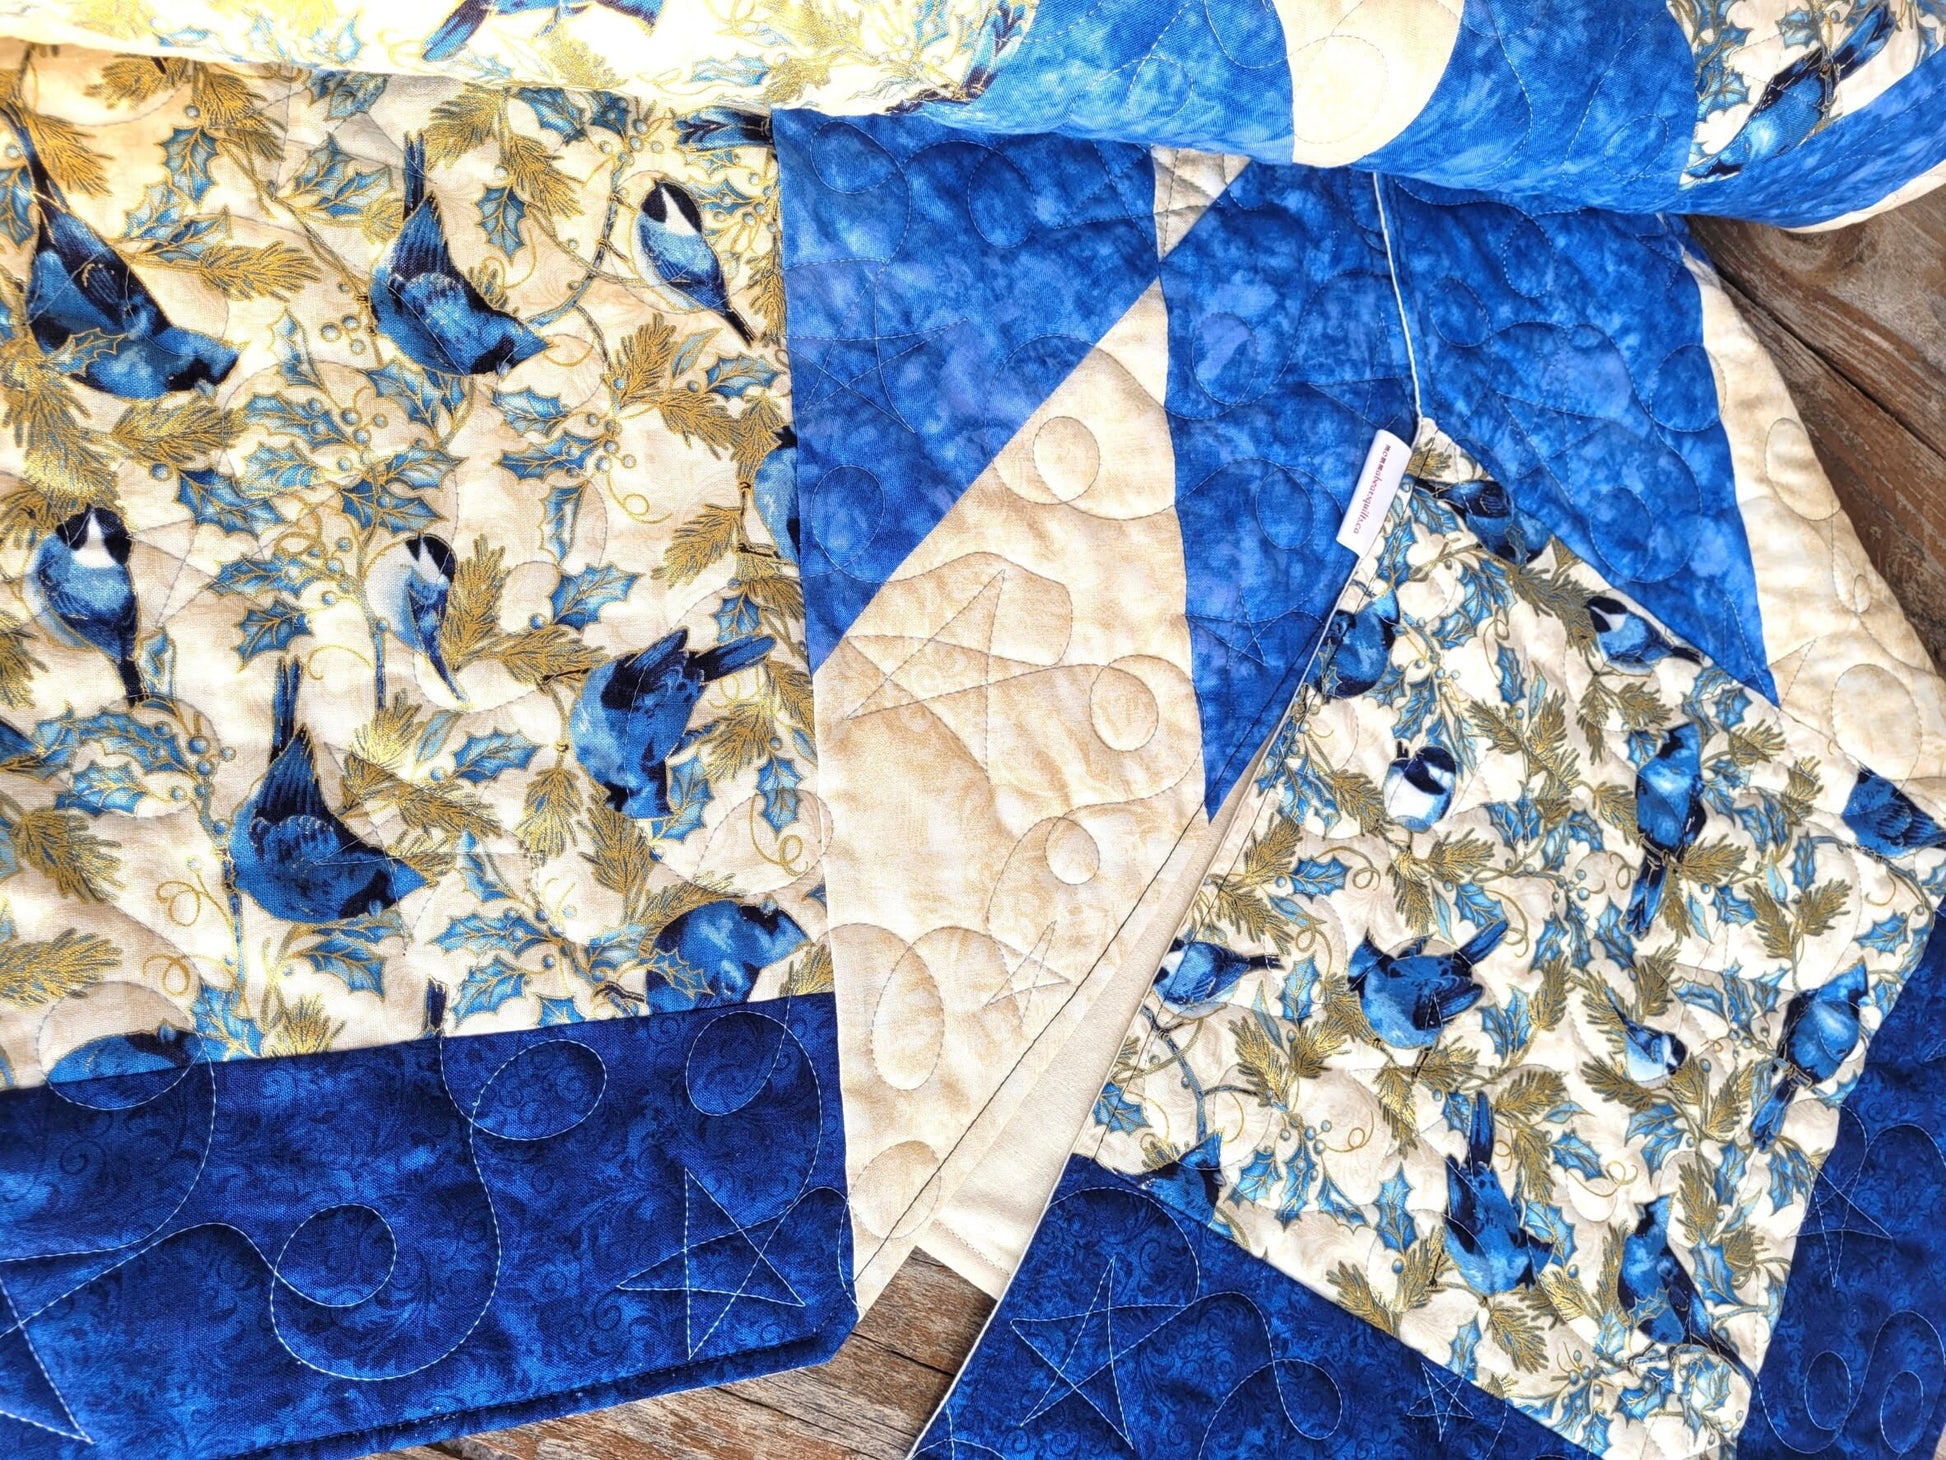 quilted tree skirt with birds in blue and white color scheme